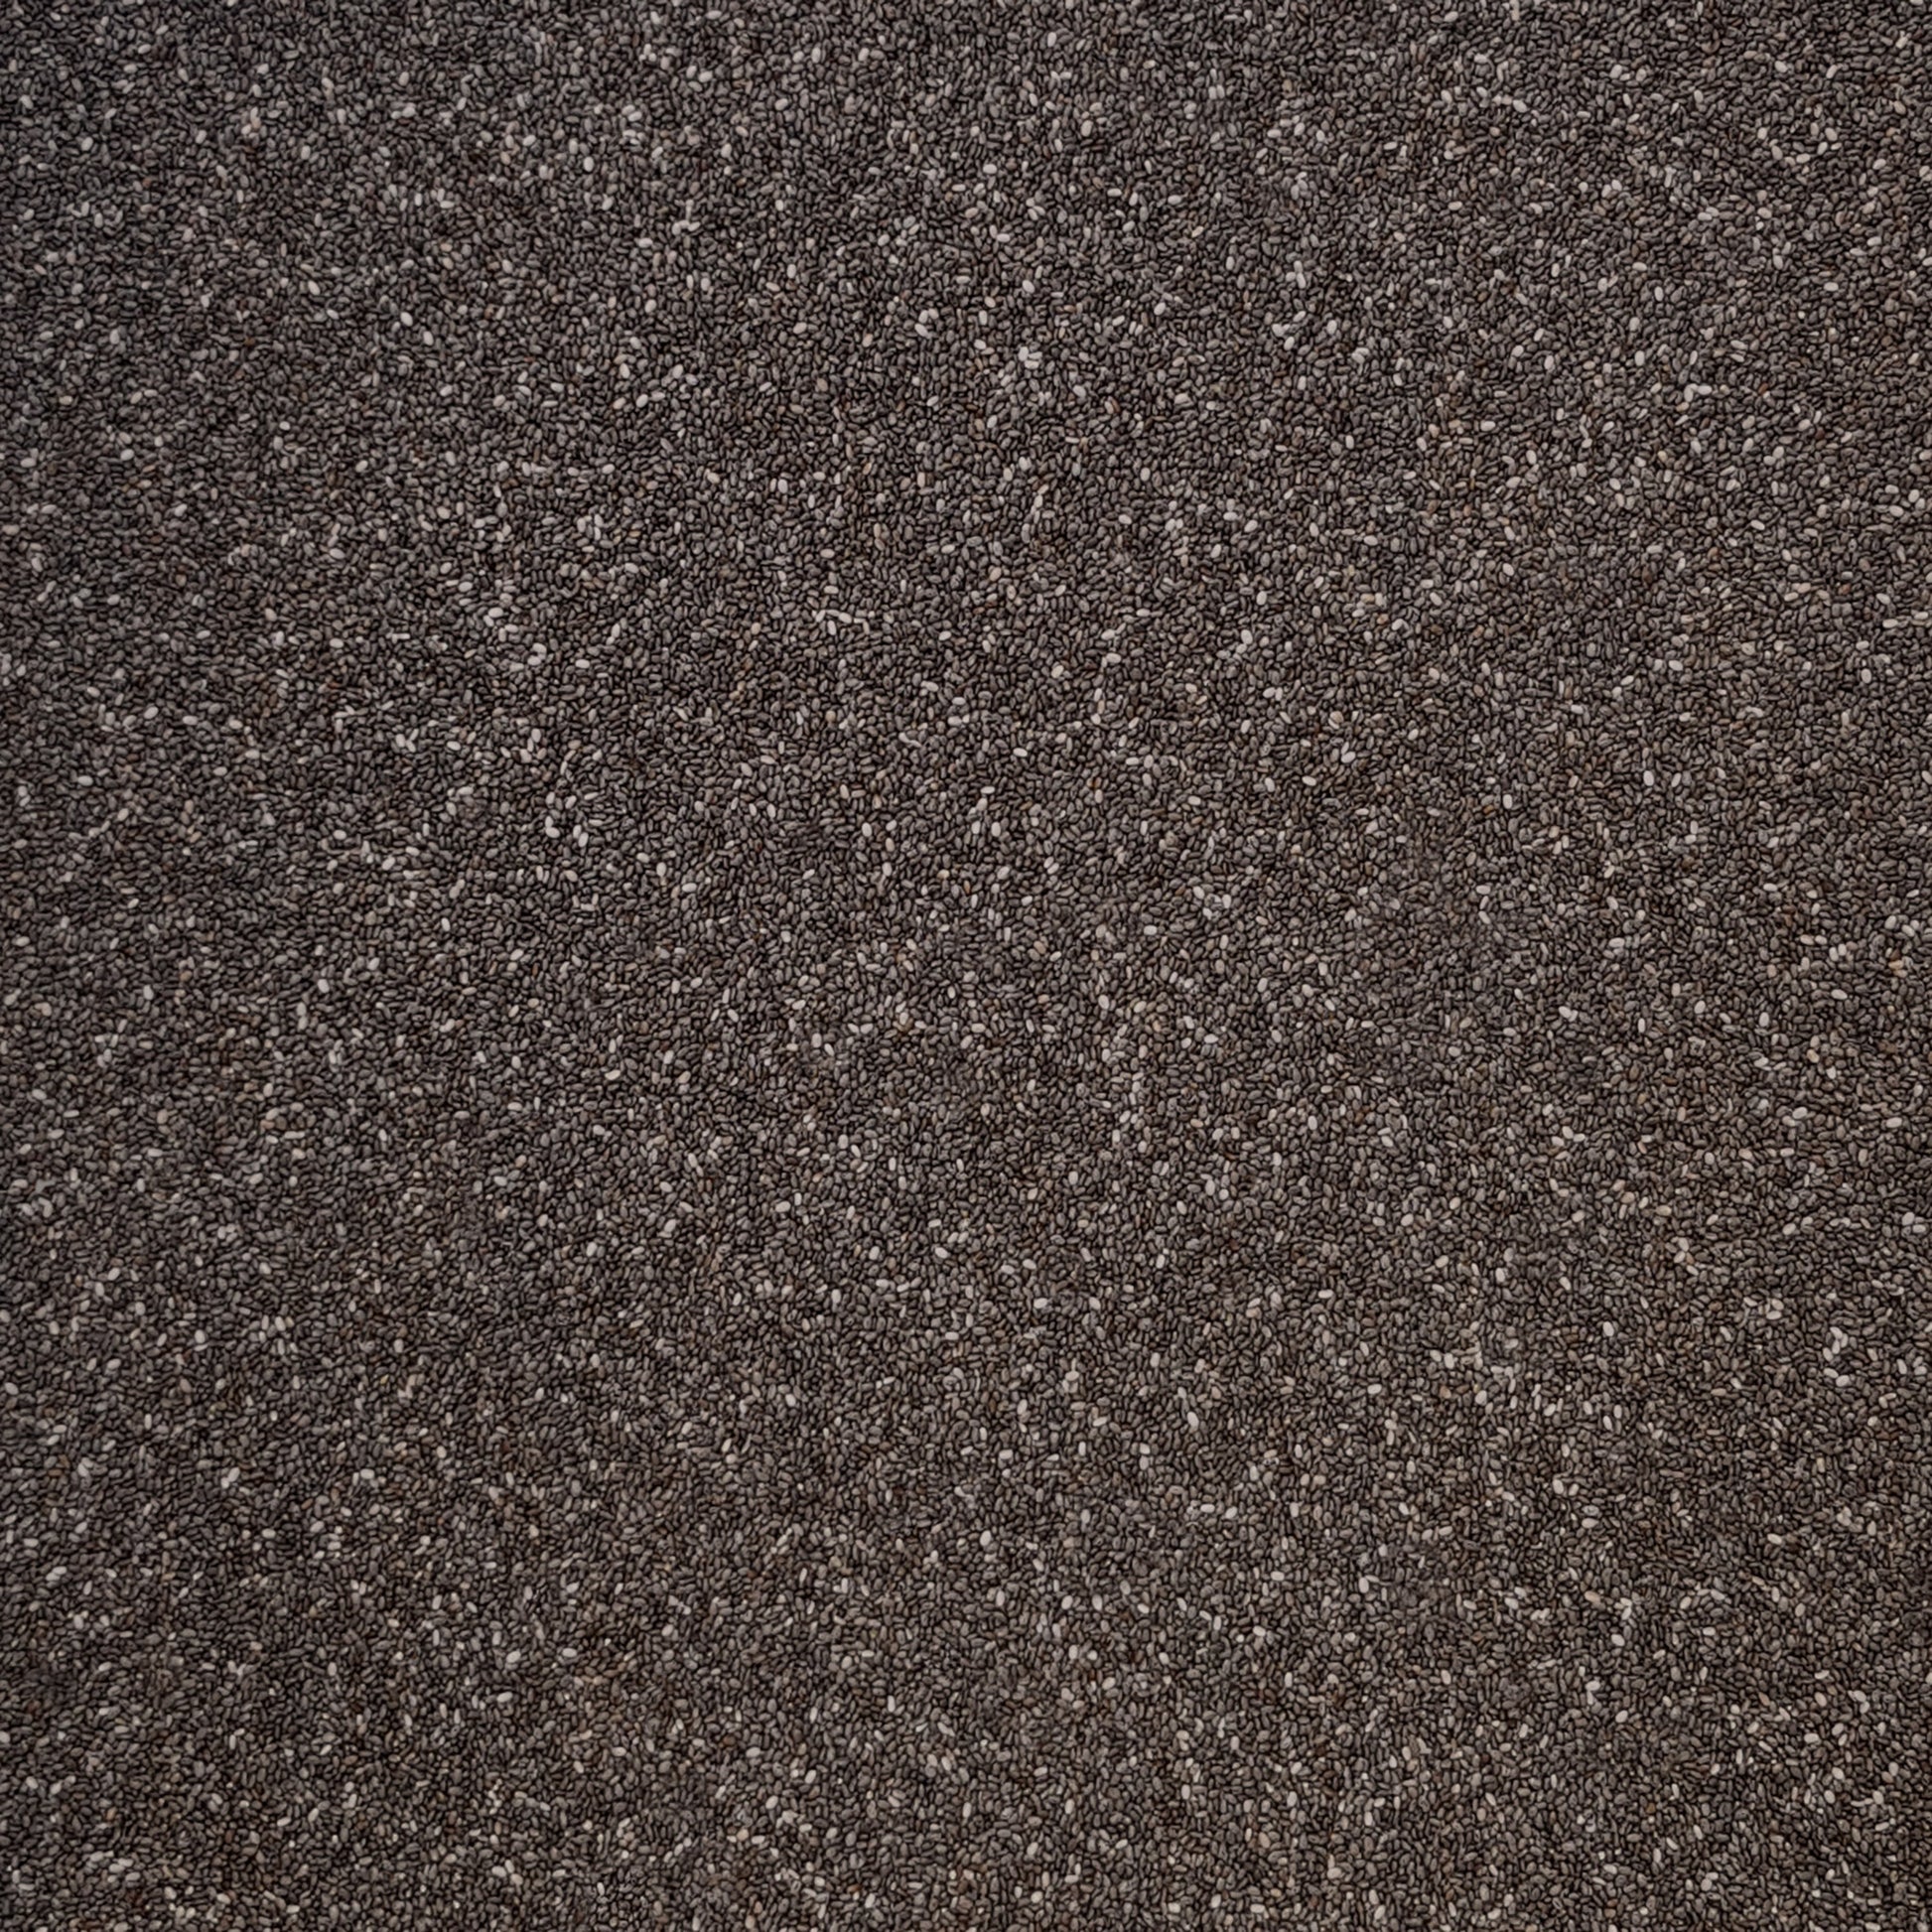 Full frame overhead image of BY NATURE Black Chia Seeds - raw, certified organic at source.